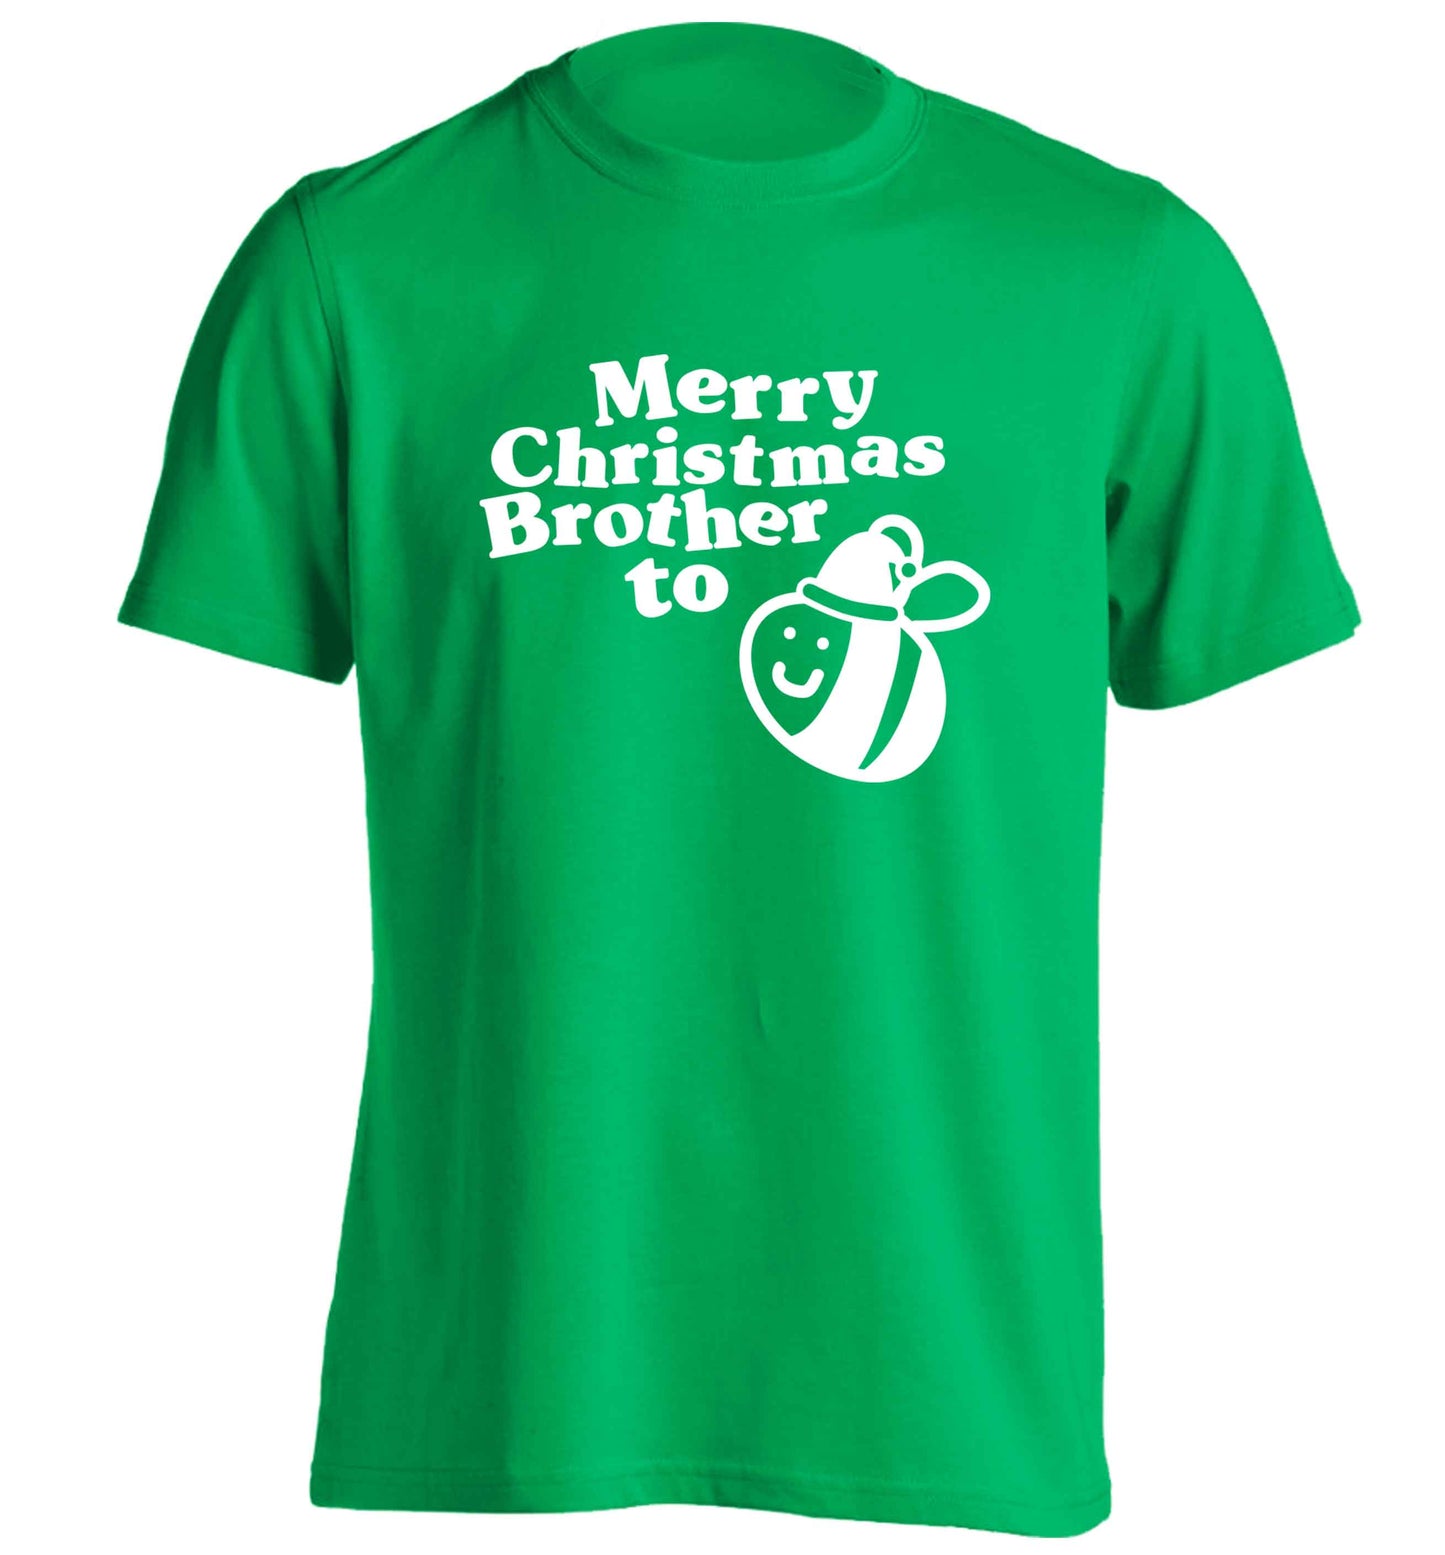 Merry Christmas brother to be adults unisex green Tshirt 2XL